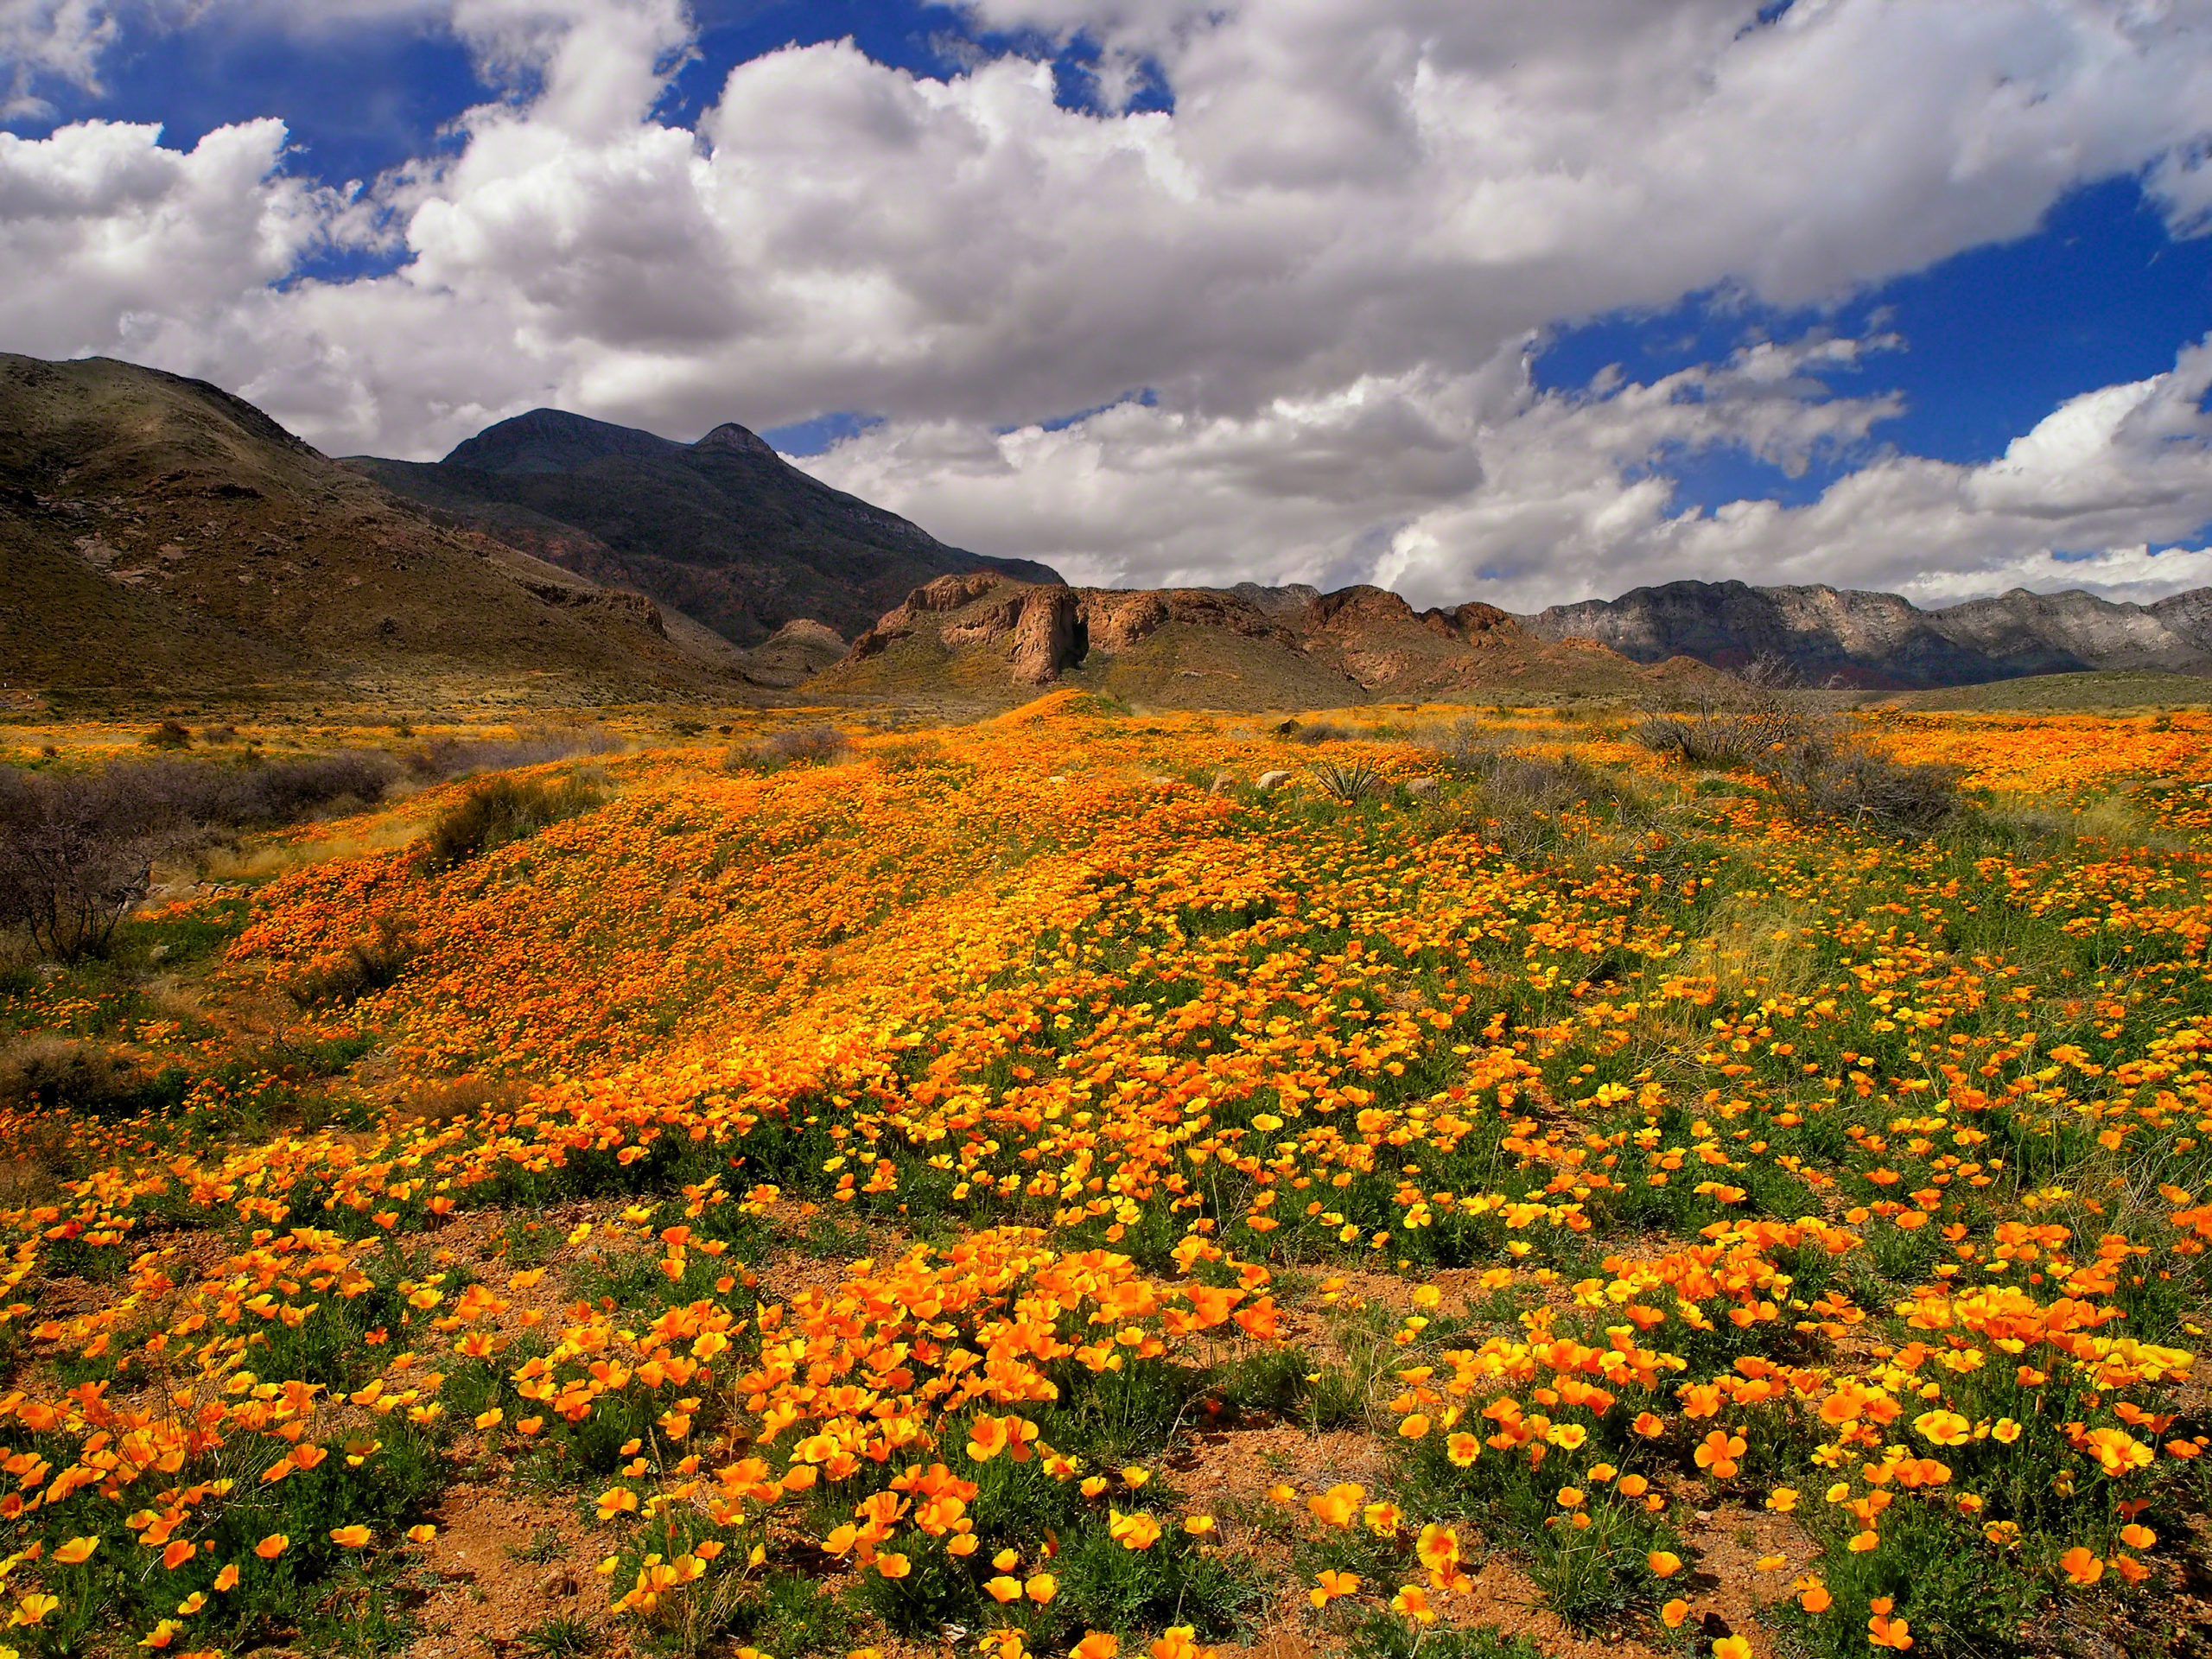 A carpet of brightly colored orange-red poppies covers the earth, with mountain ranges in the distance under a partly cloudy sky.